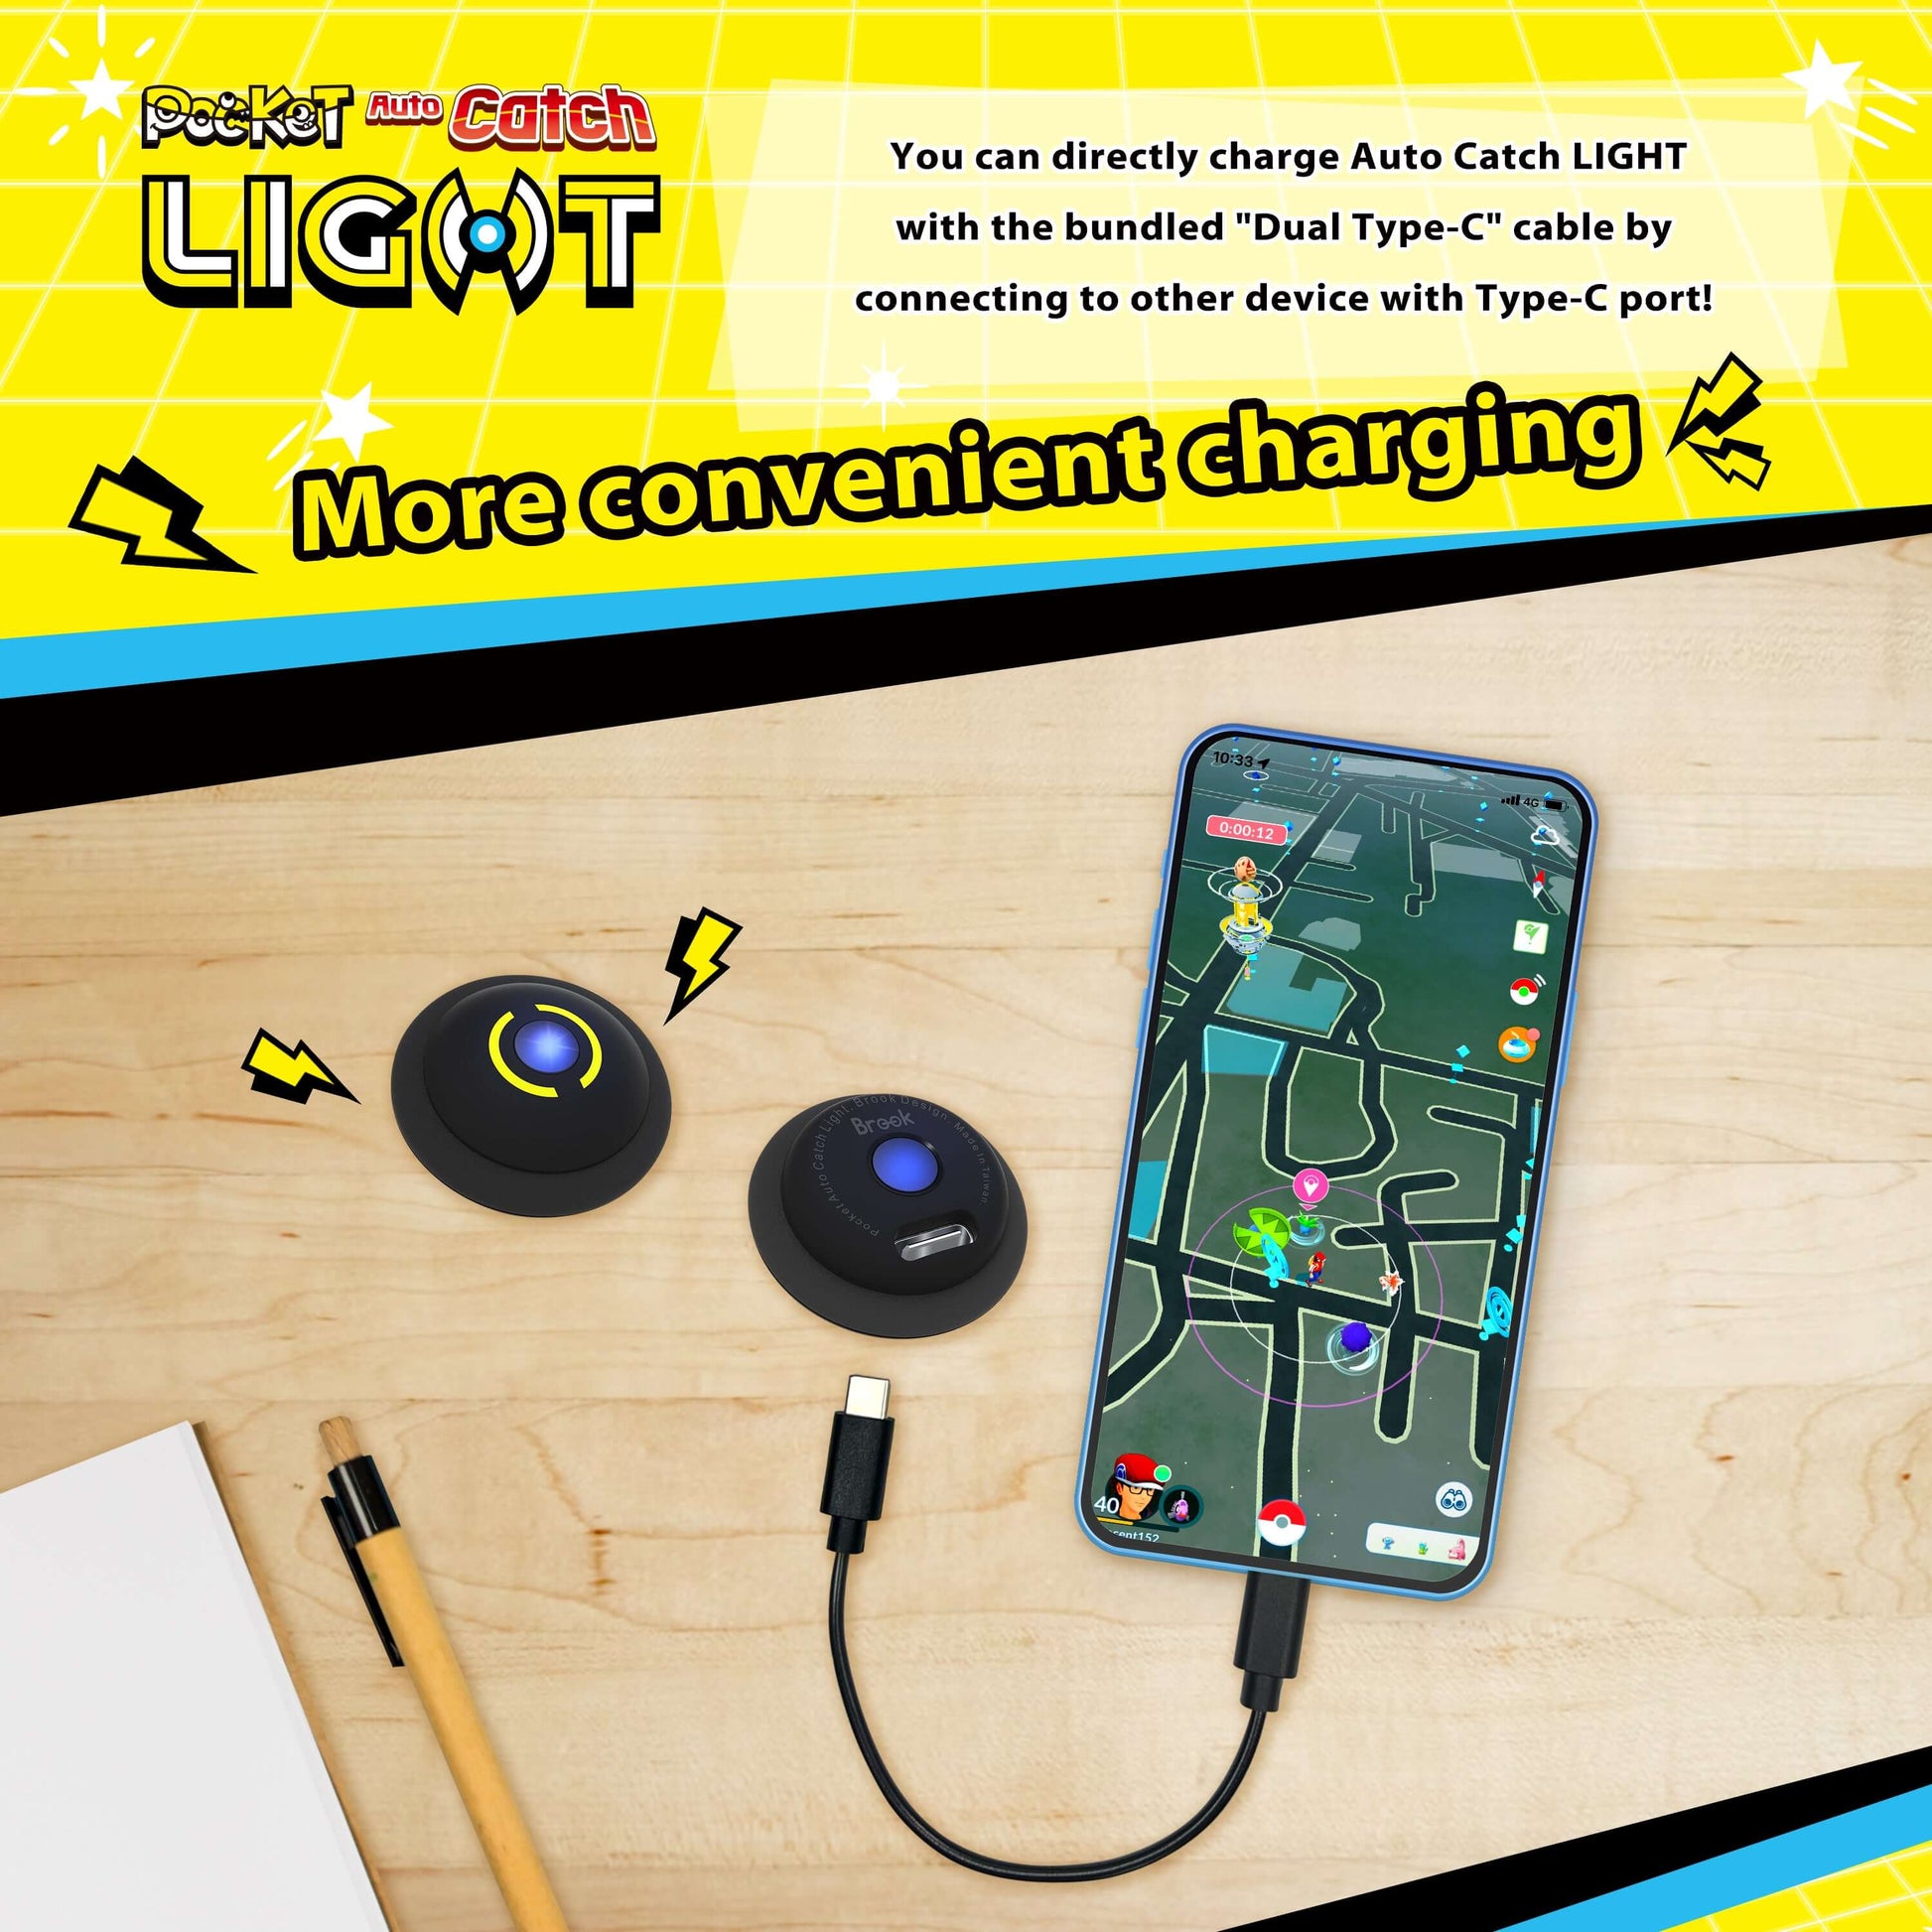 Brook Auto Catch Light easy charging